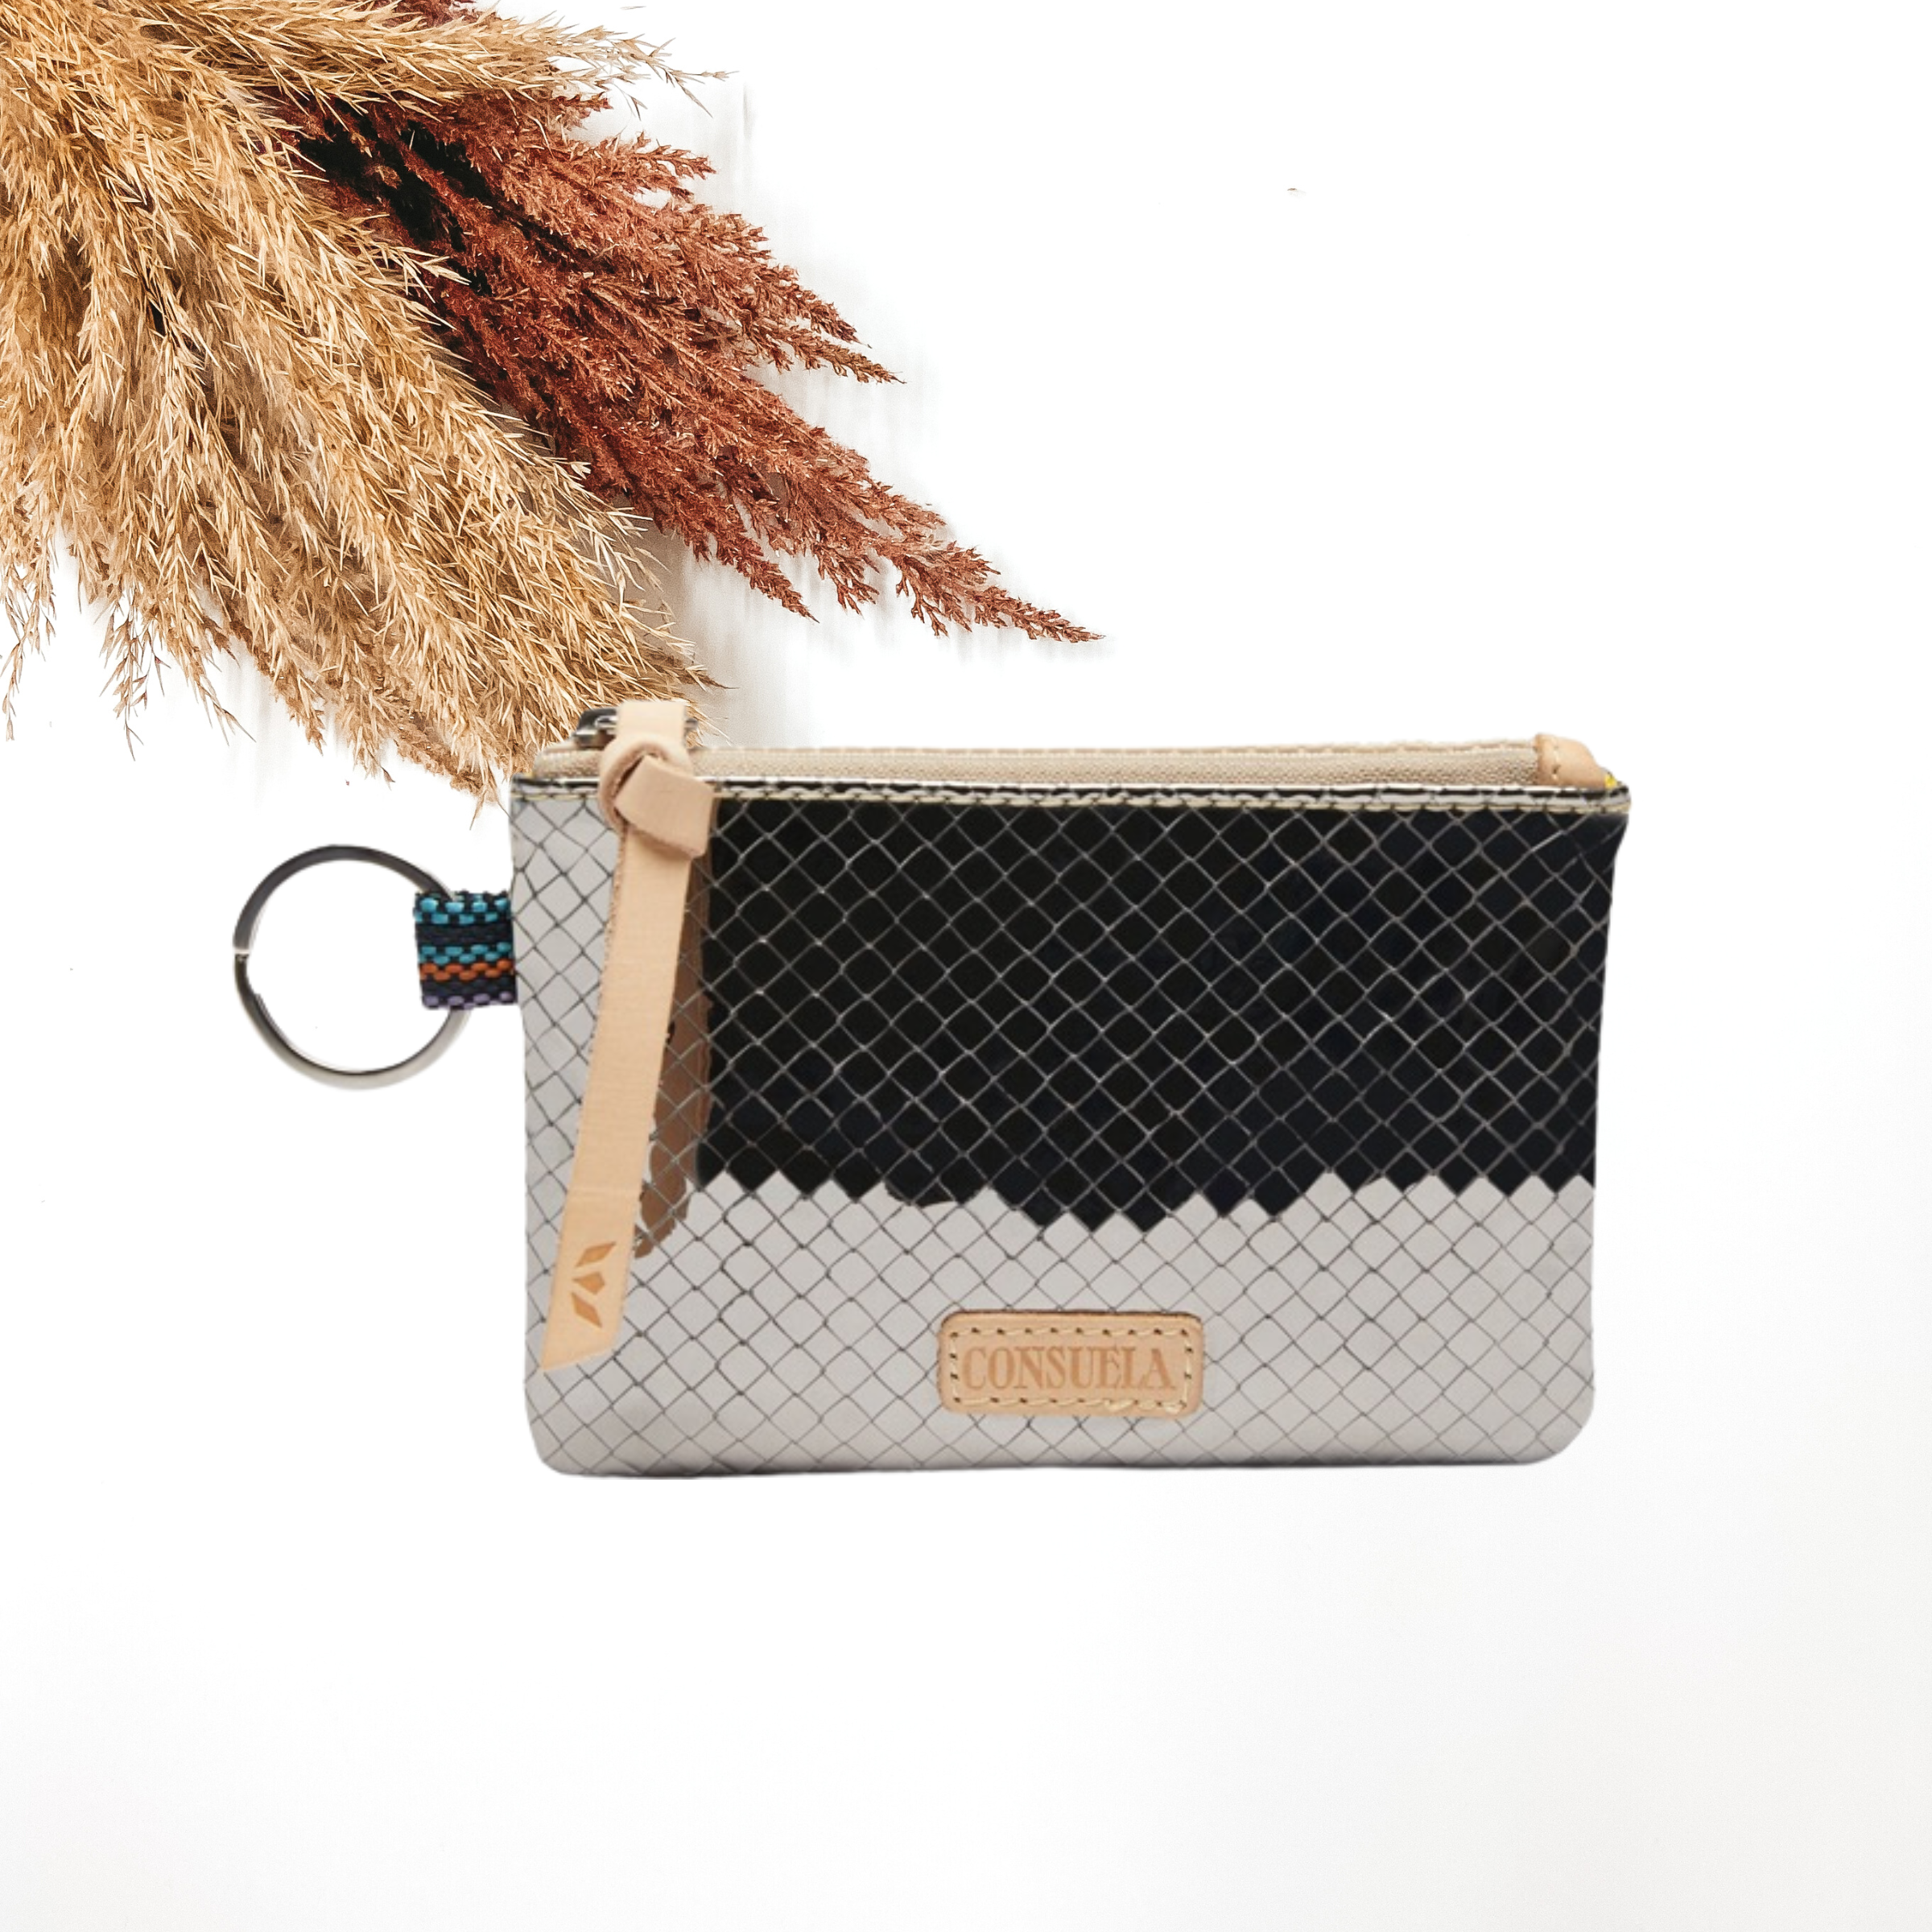 Small, rectangle pouch with a silver key ring on the left side and a light tan zipper pull. This pouch has a metallic silver color and woven print design. This purse is pictured on a white background with tan and brown pompous grass on the right side.